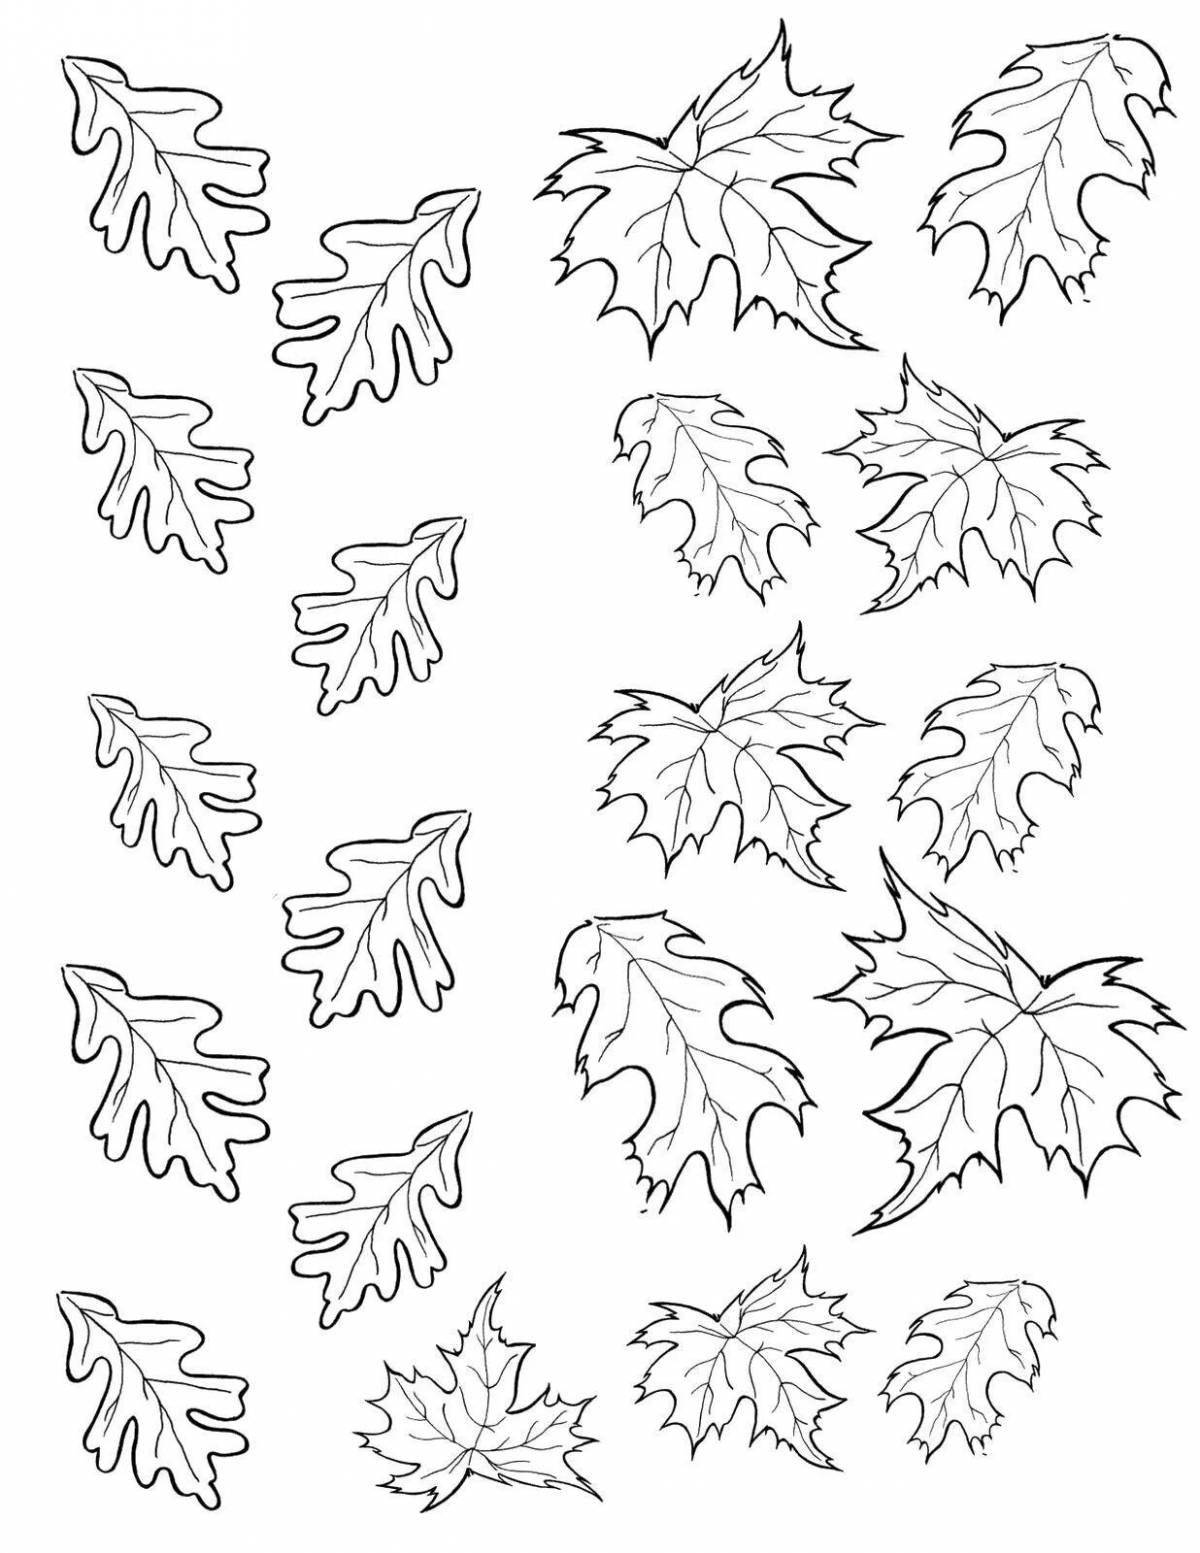 Bright multi-sheet coloring pages